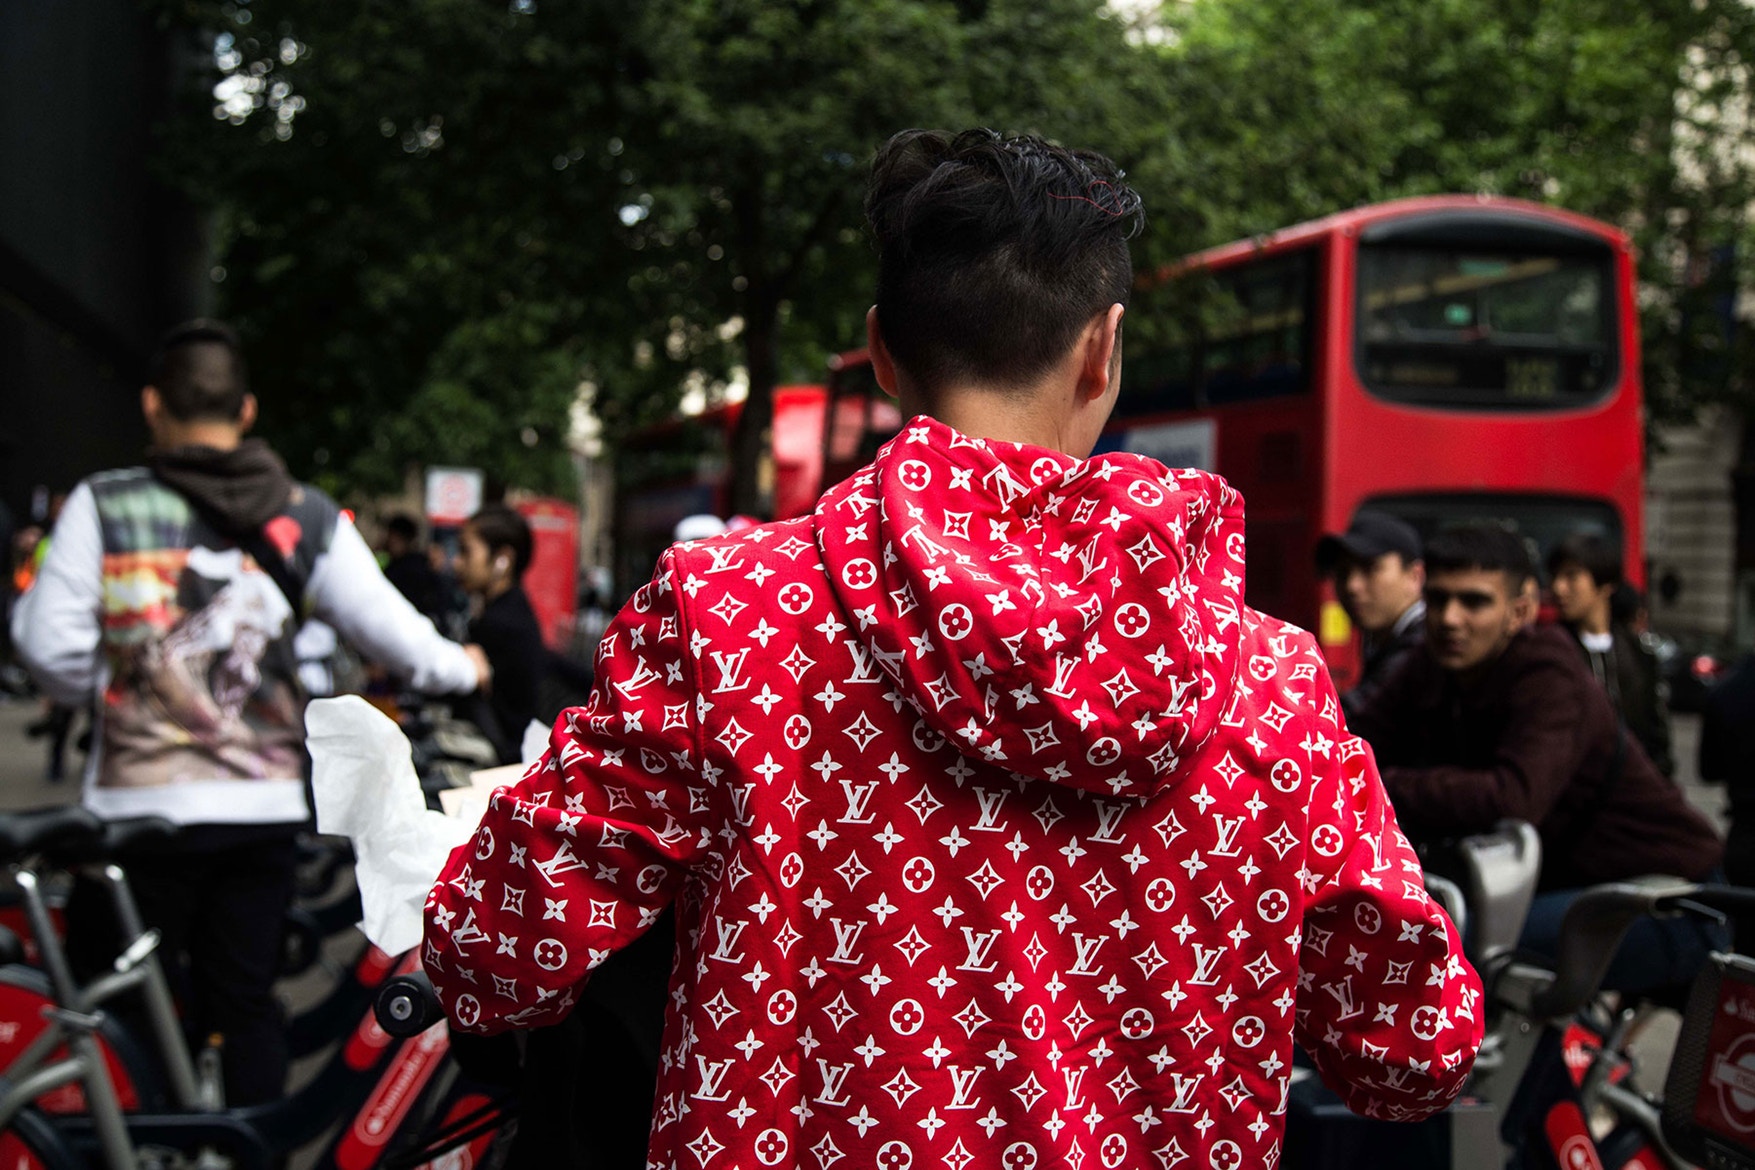 All Pieces From Supreme x Louis Vuitton